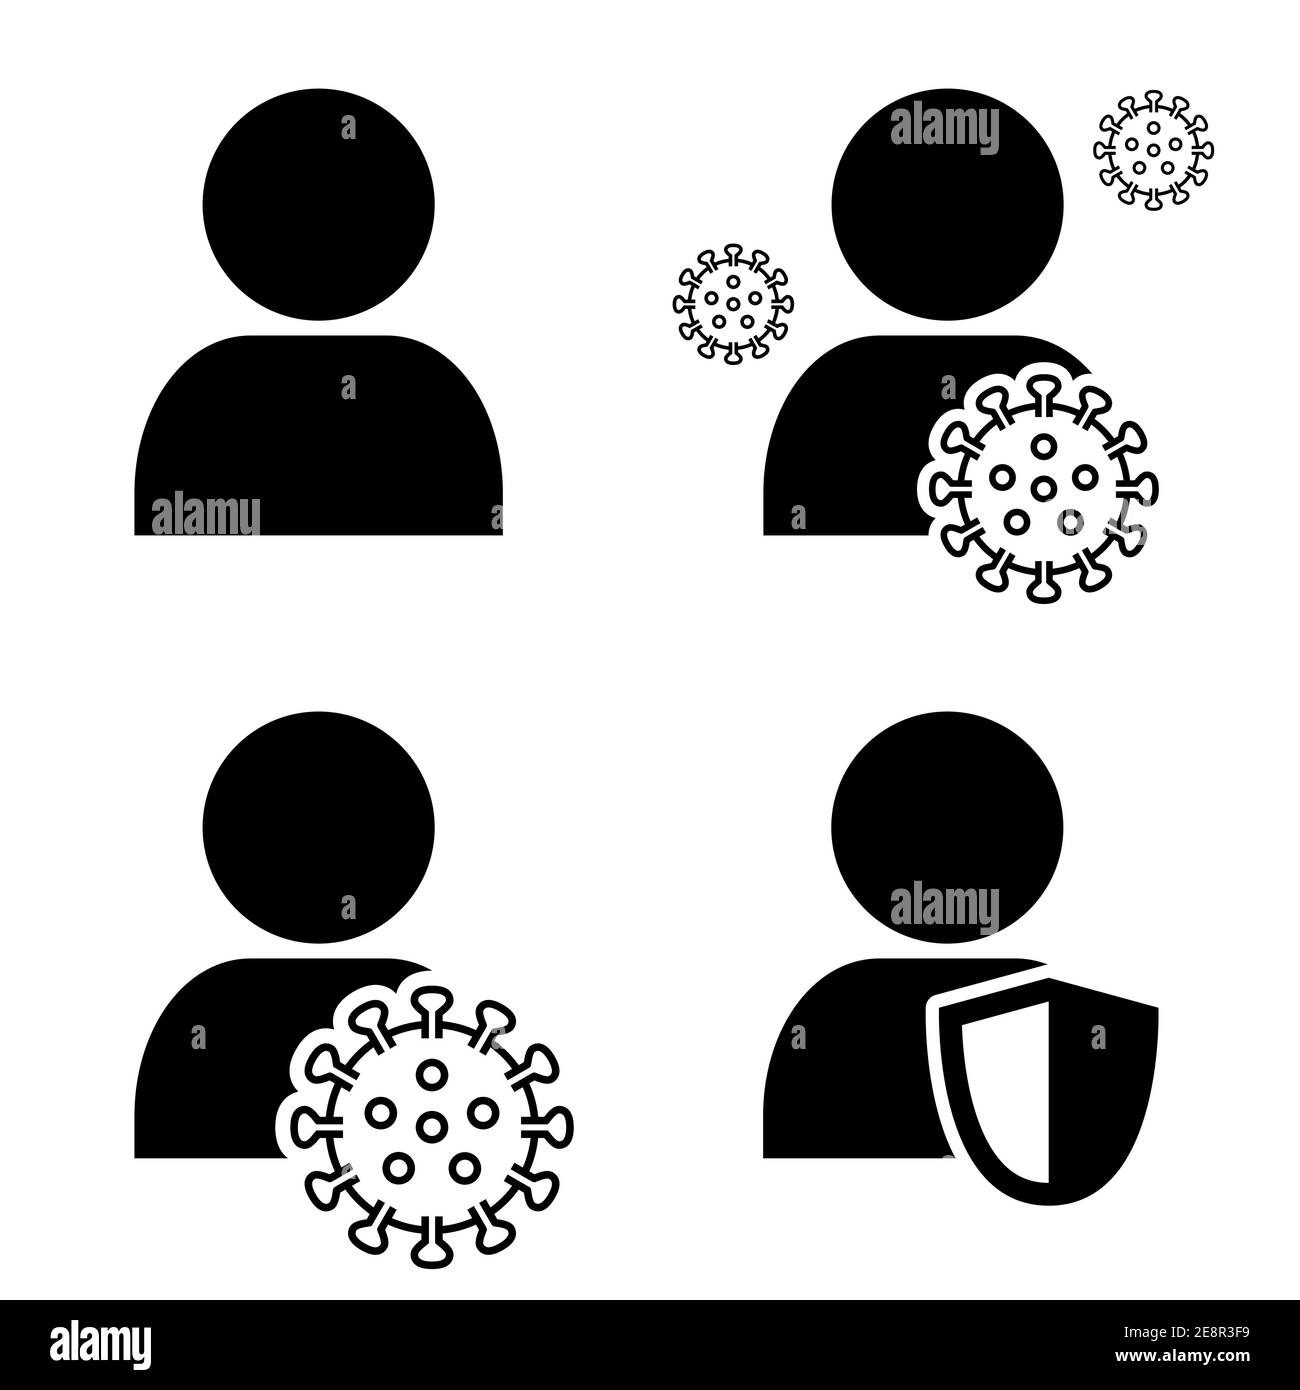 Person icons with virus infection and virus protection symbols vector illustration for viral and health topics Stock Vector